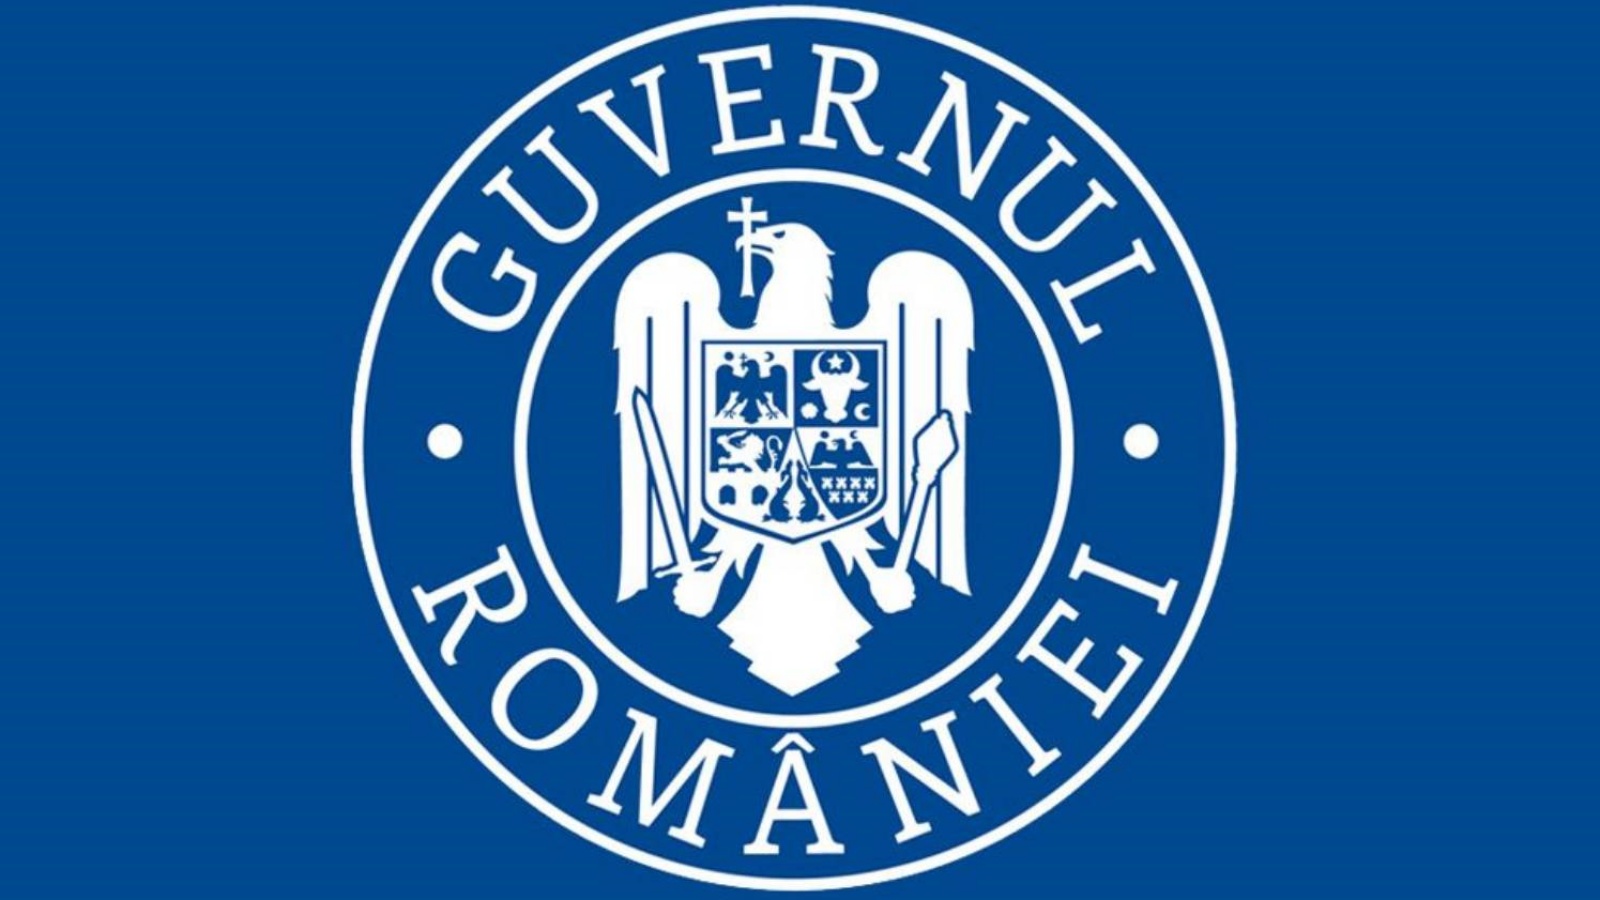 The Romanian government is on extended alert until September 2021